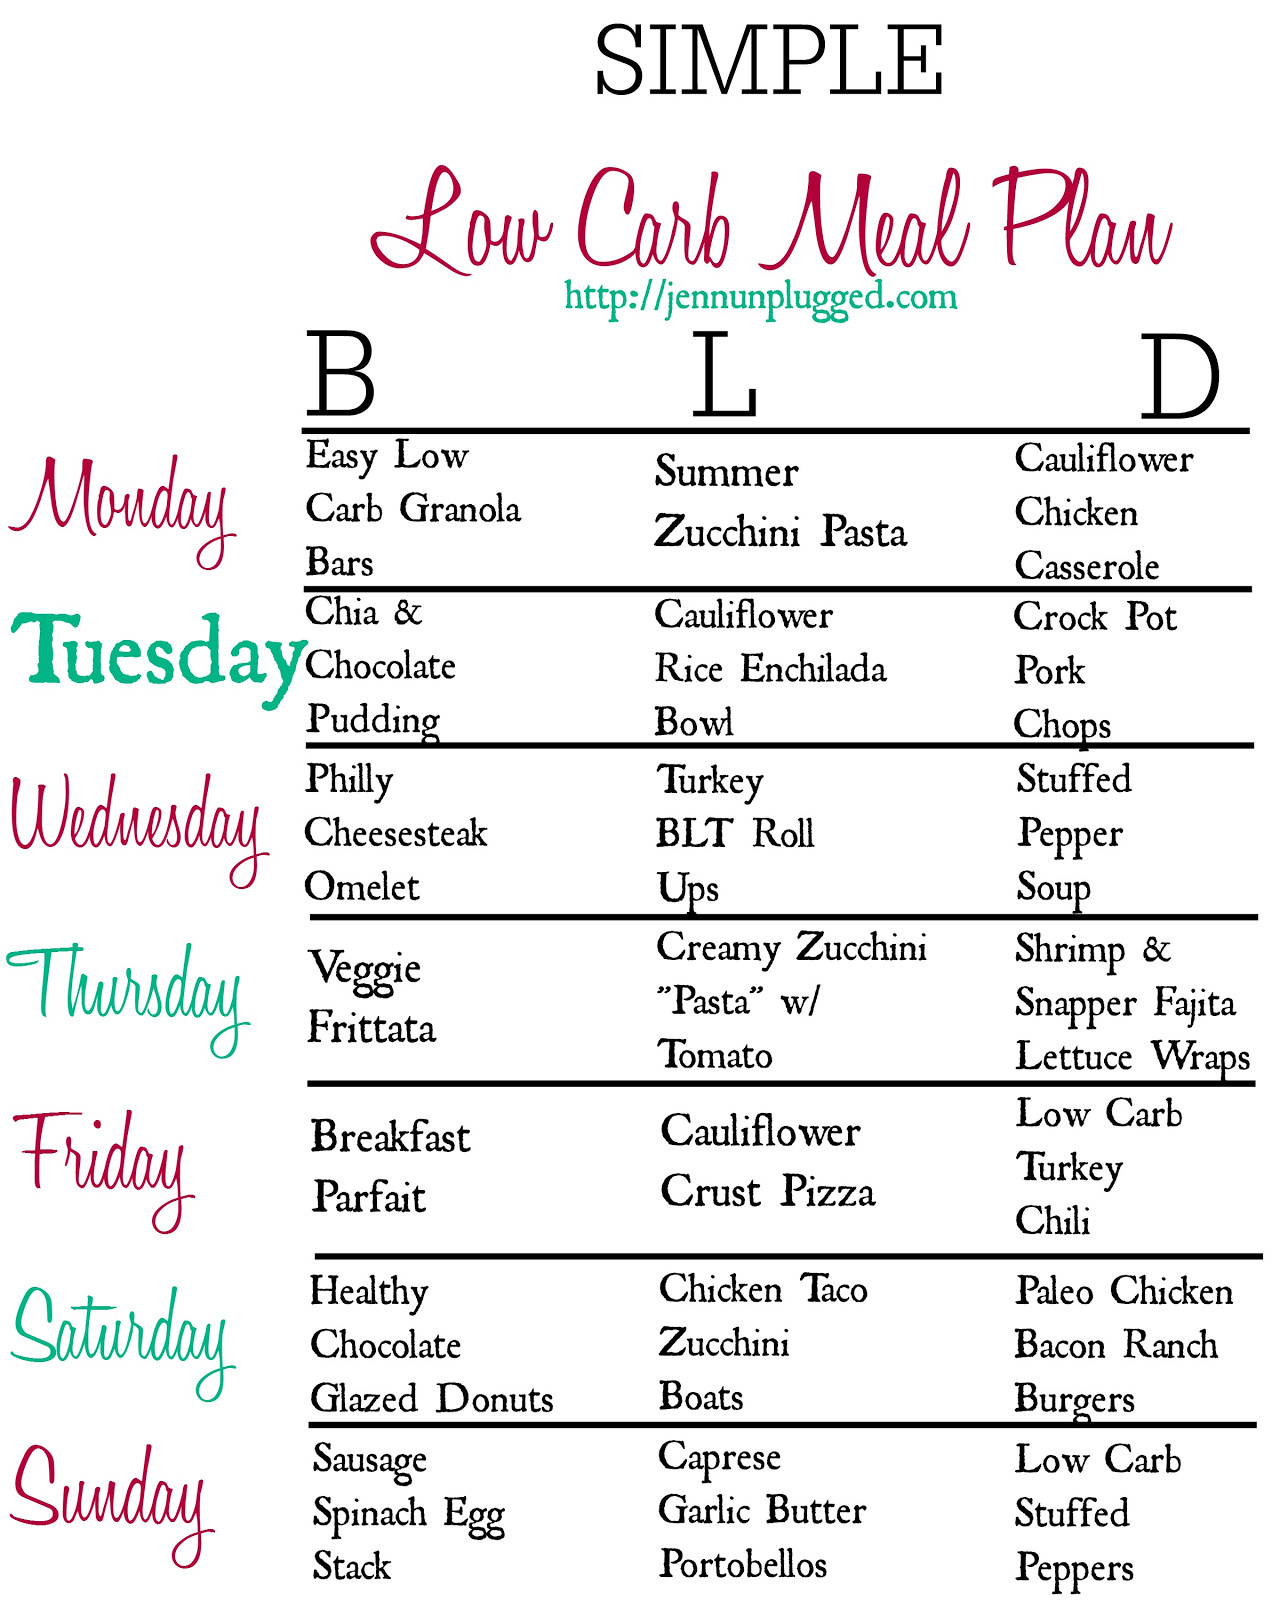 Low Carb Diet Plan 21 Days Meal Ideas
 Pin on KETO & LOW CARB FOOD INFO